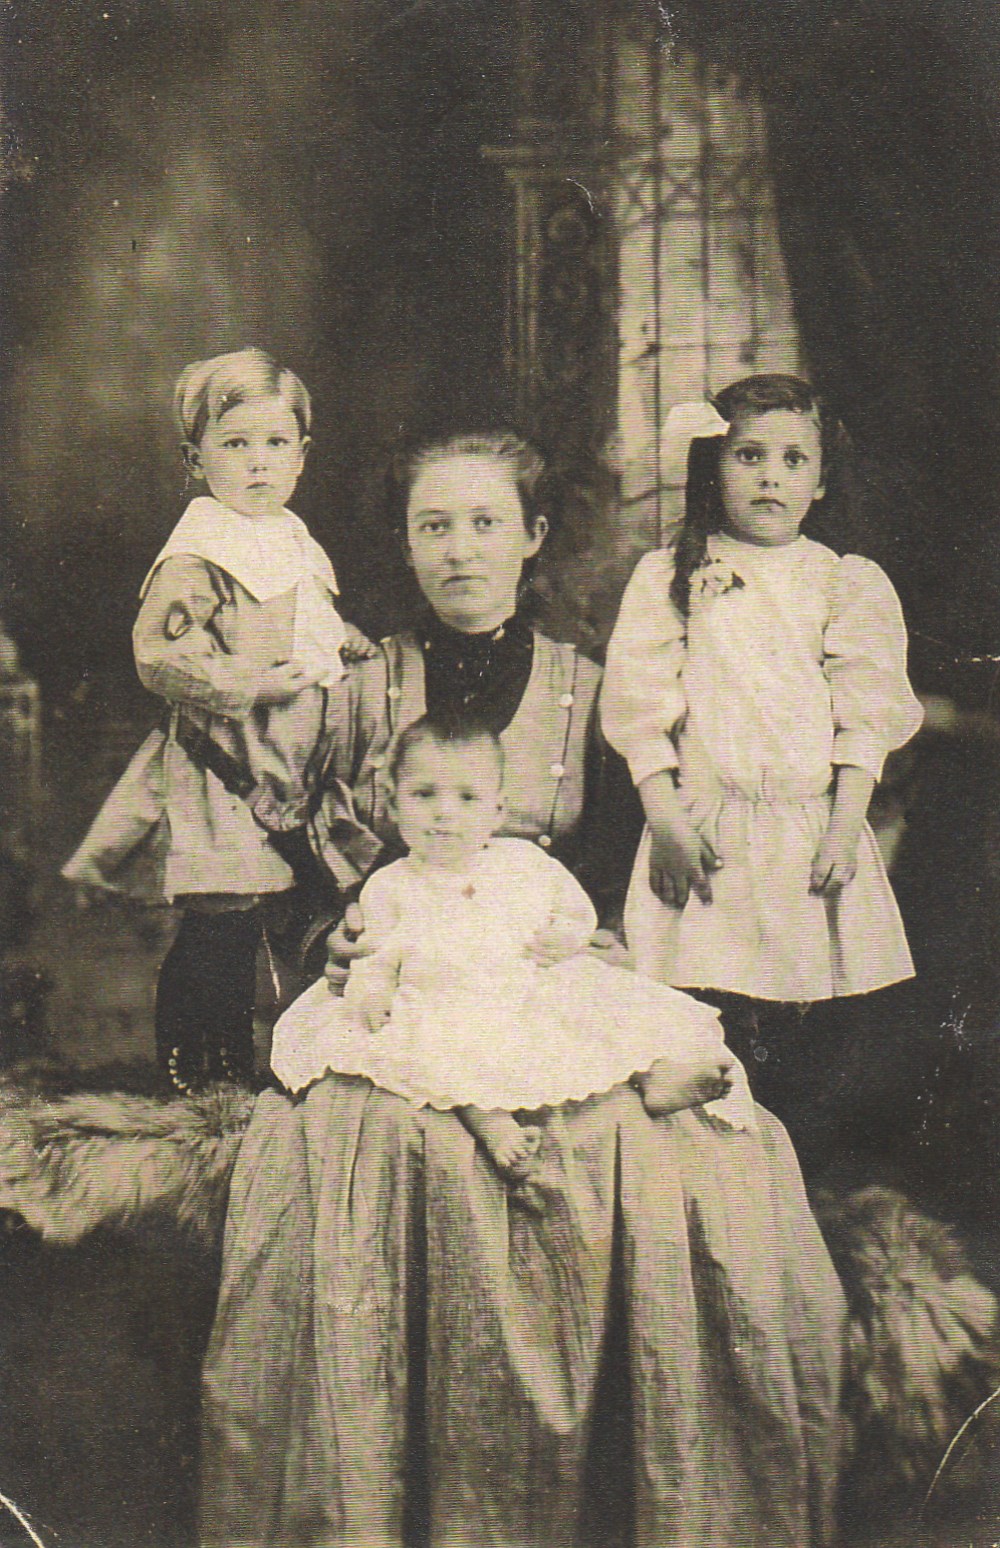 Cora Alice Parker and her mother Emma Watson (c1858 - 9 Dec 1889)